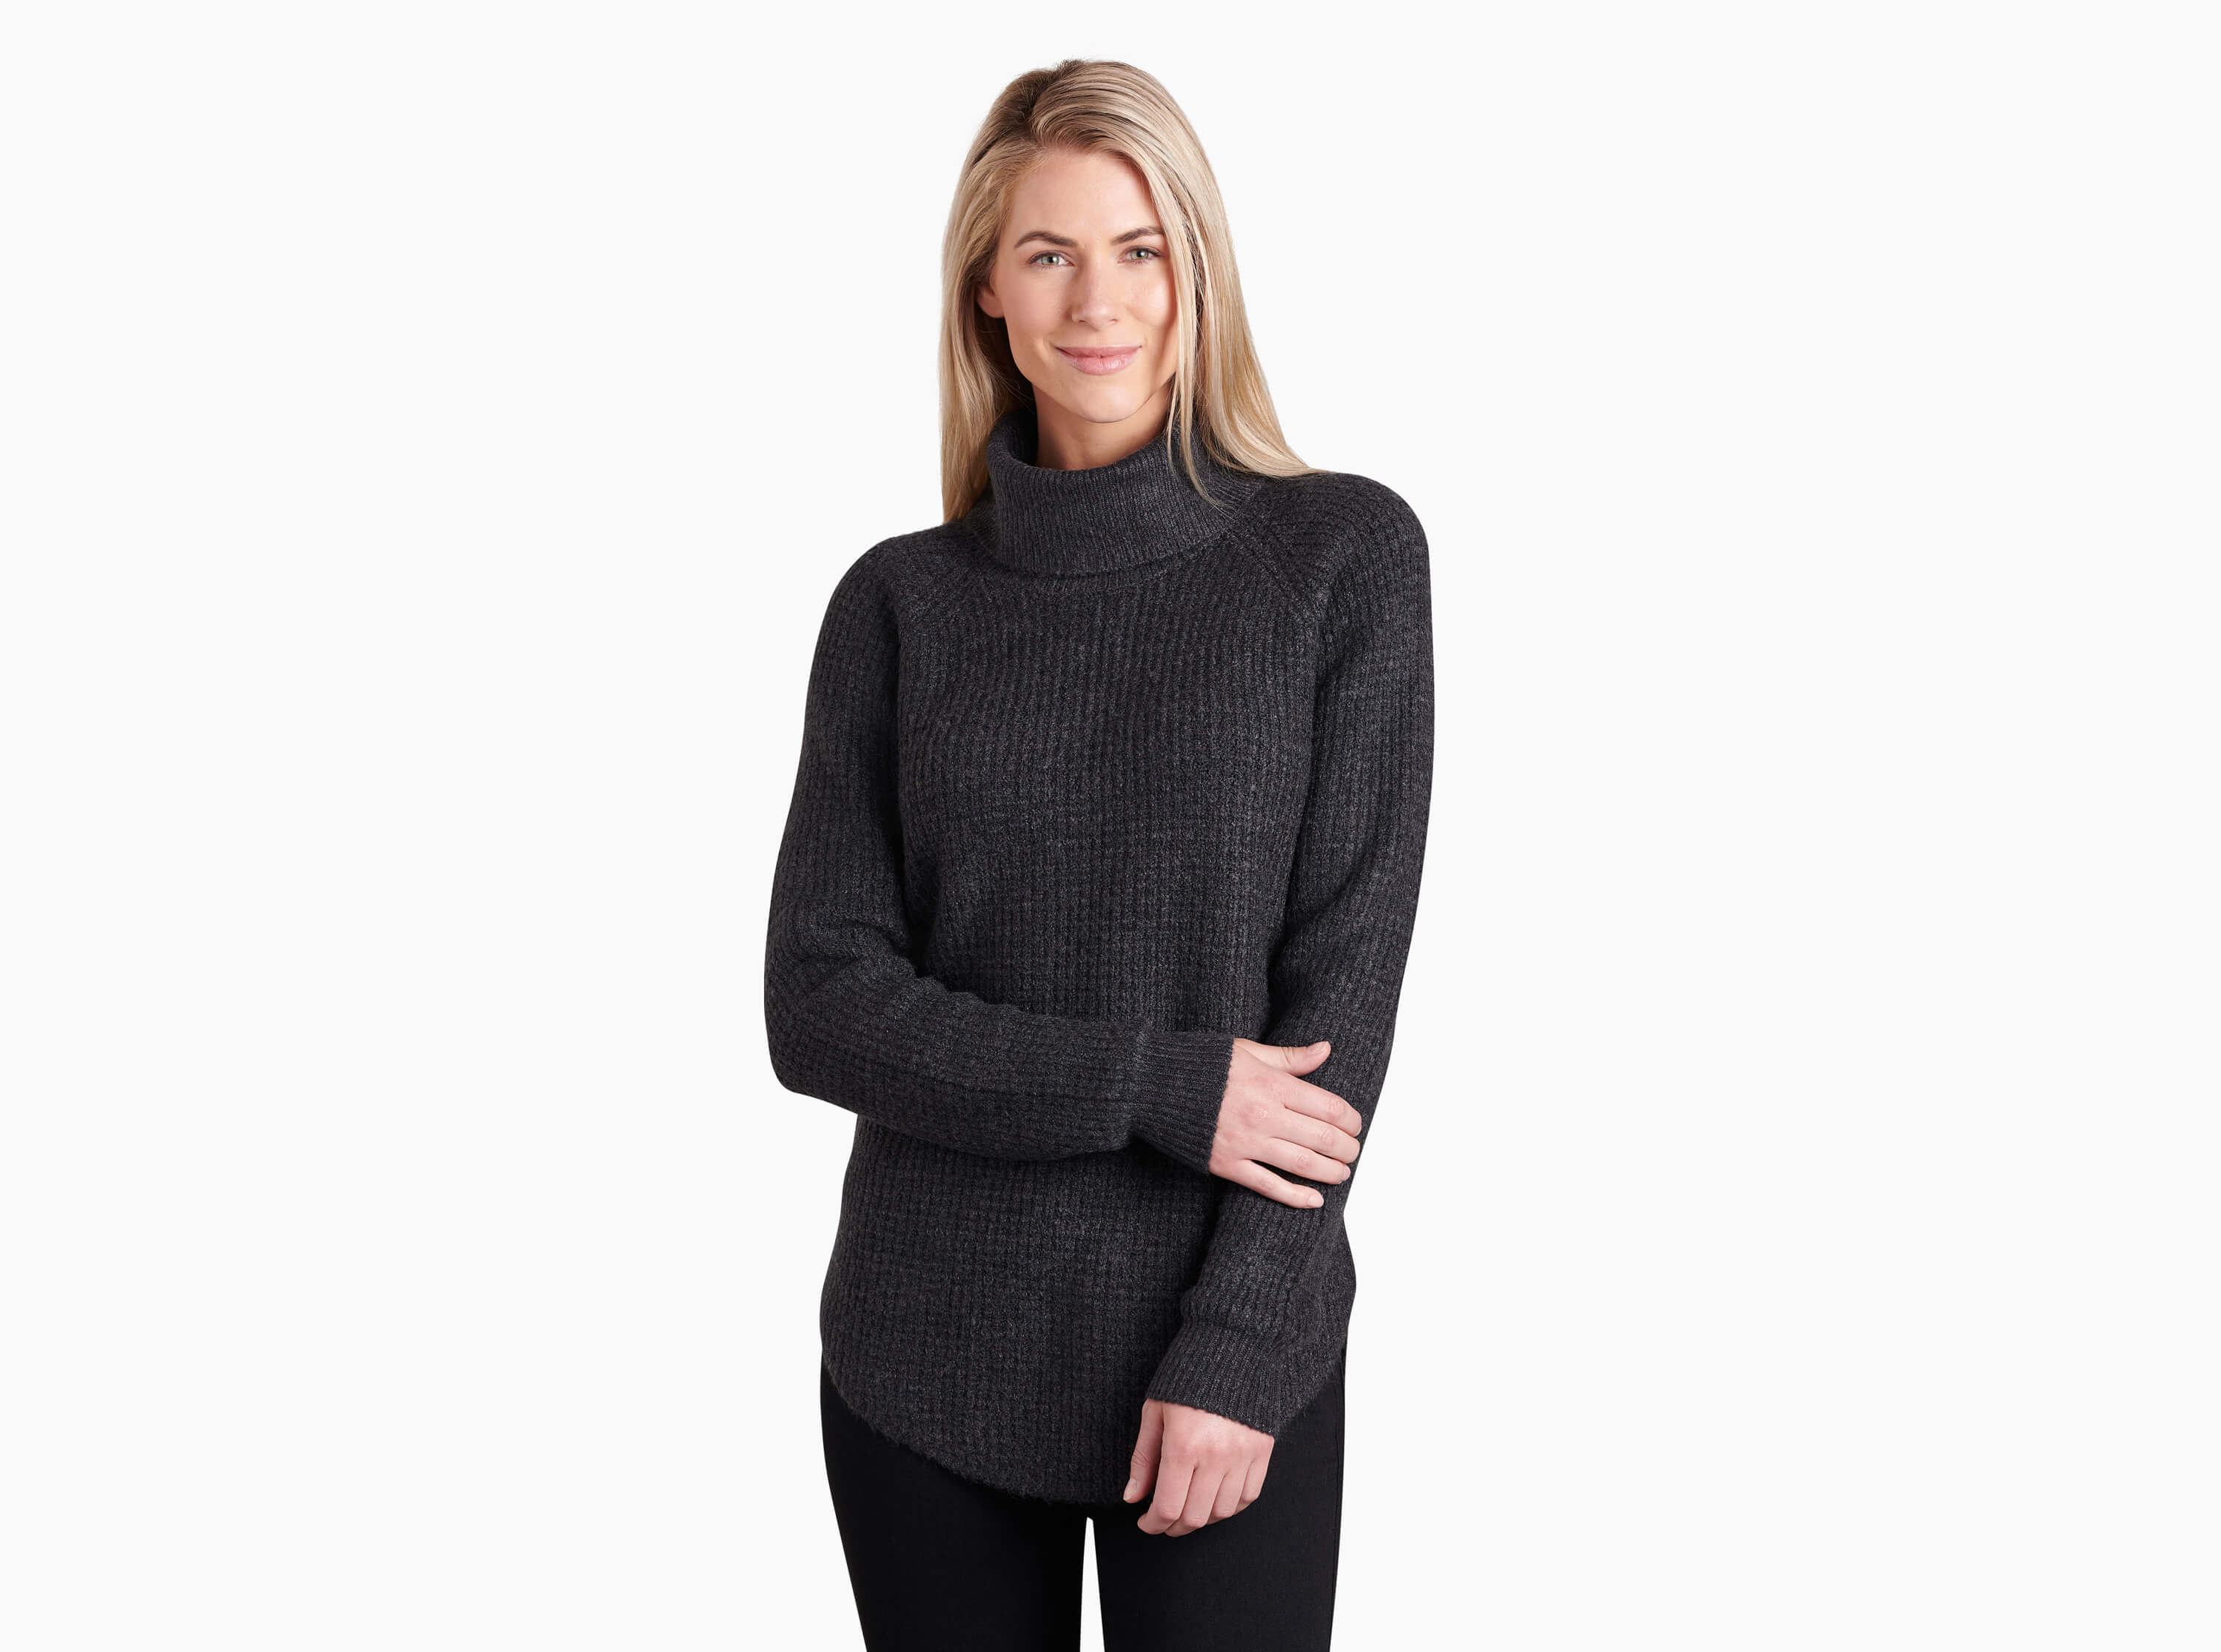 Vamos Outdoors - The KÜHL Sienna Sweater is a perfect fit every